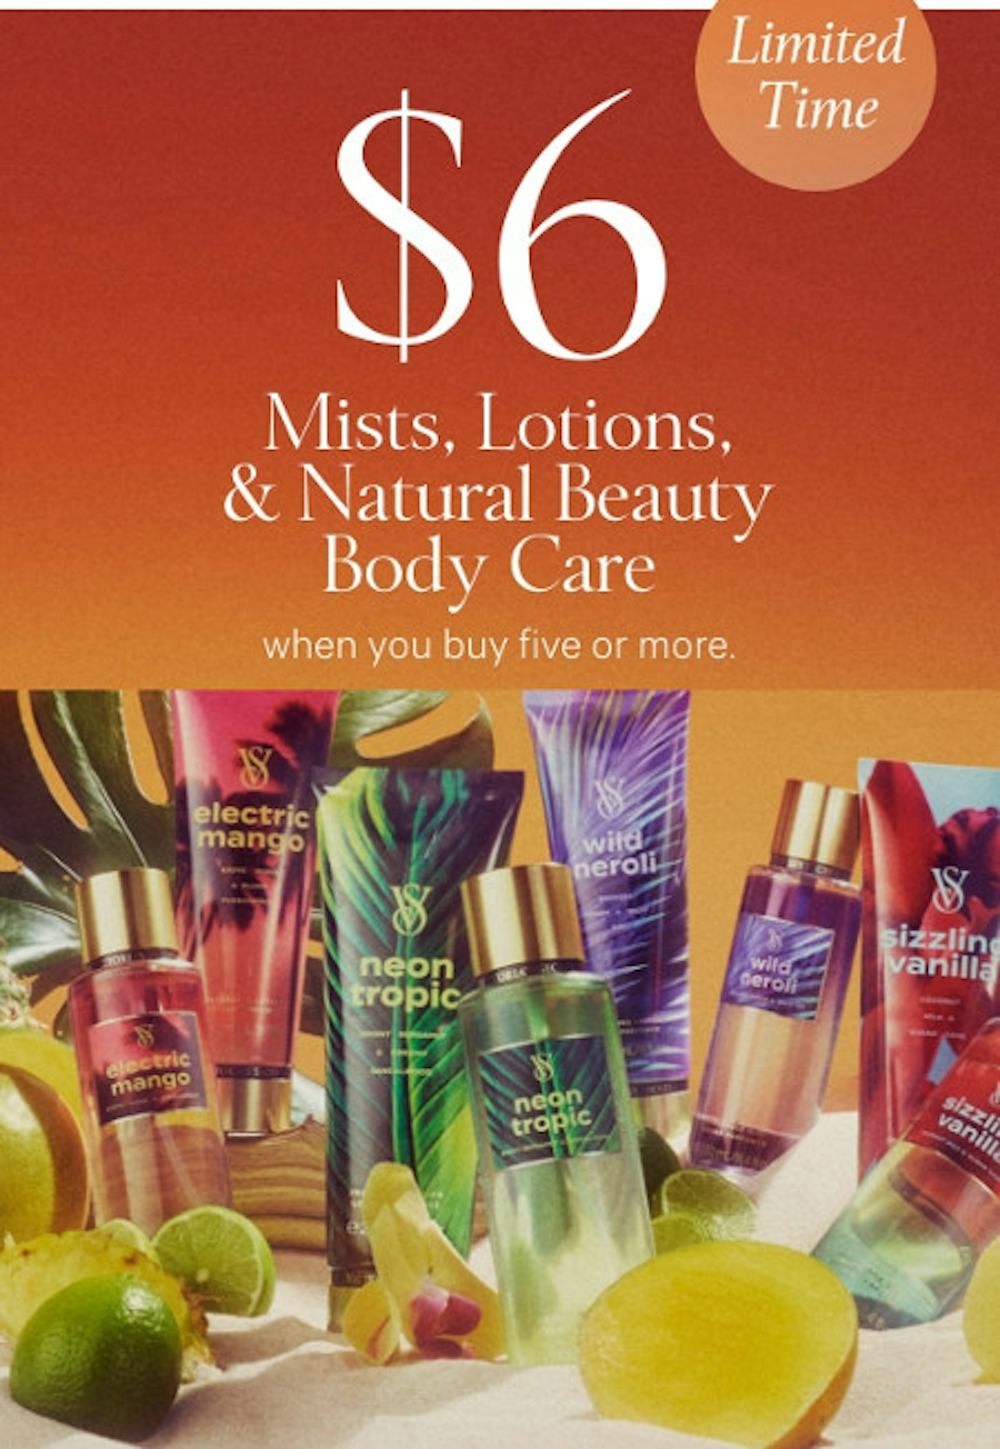 $6 Mists, Lotions, and Natural Beauty Body Care